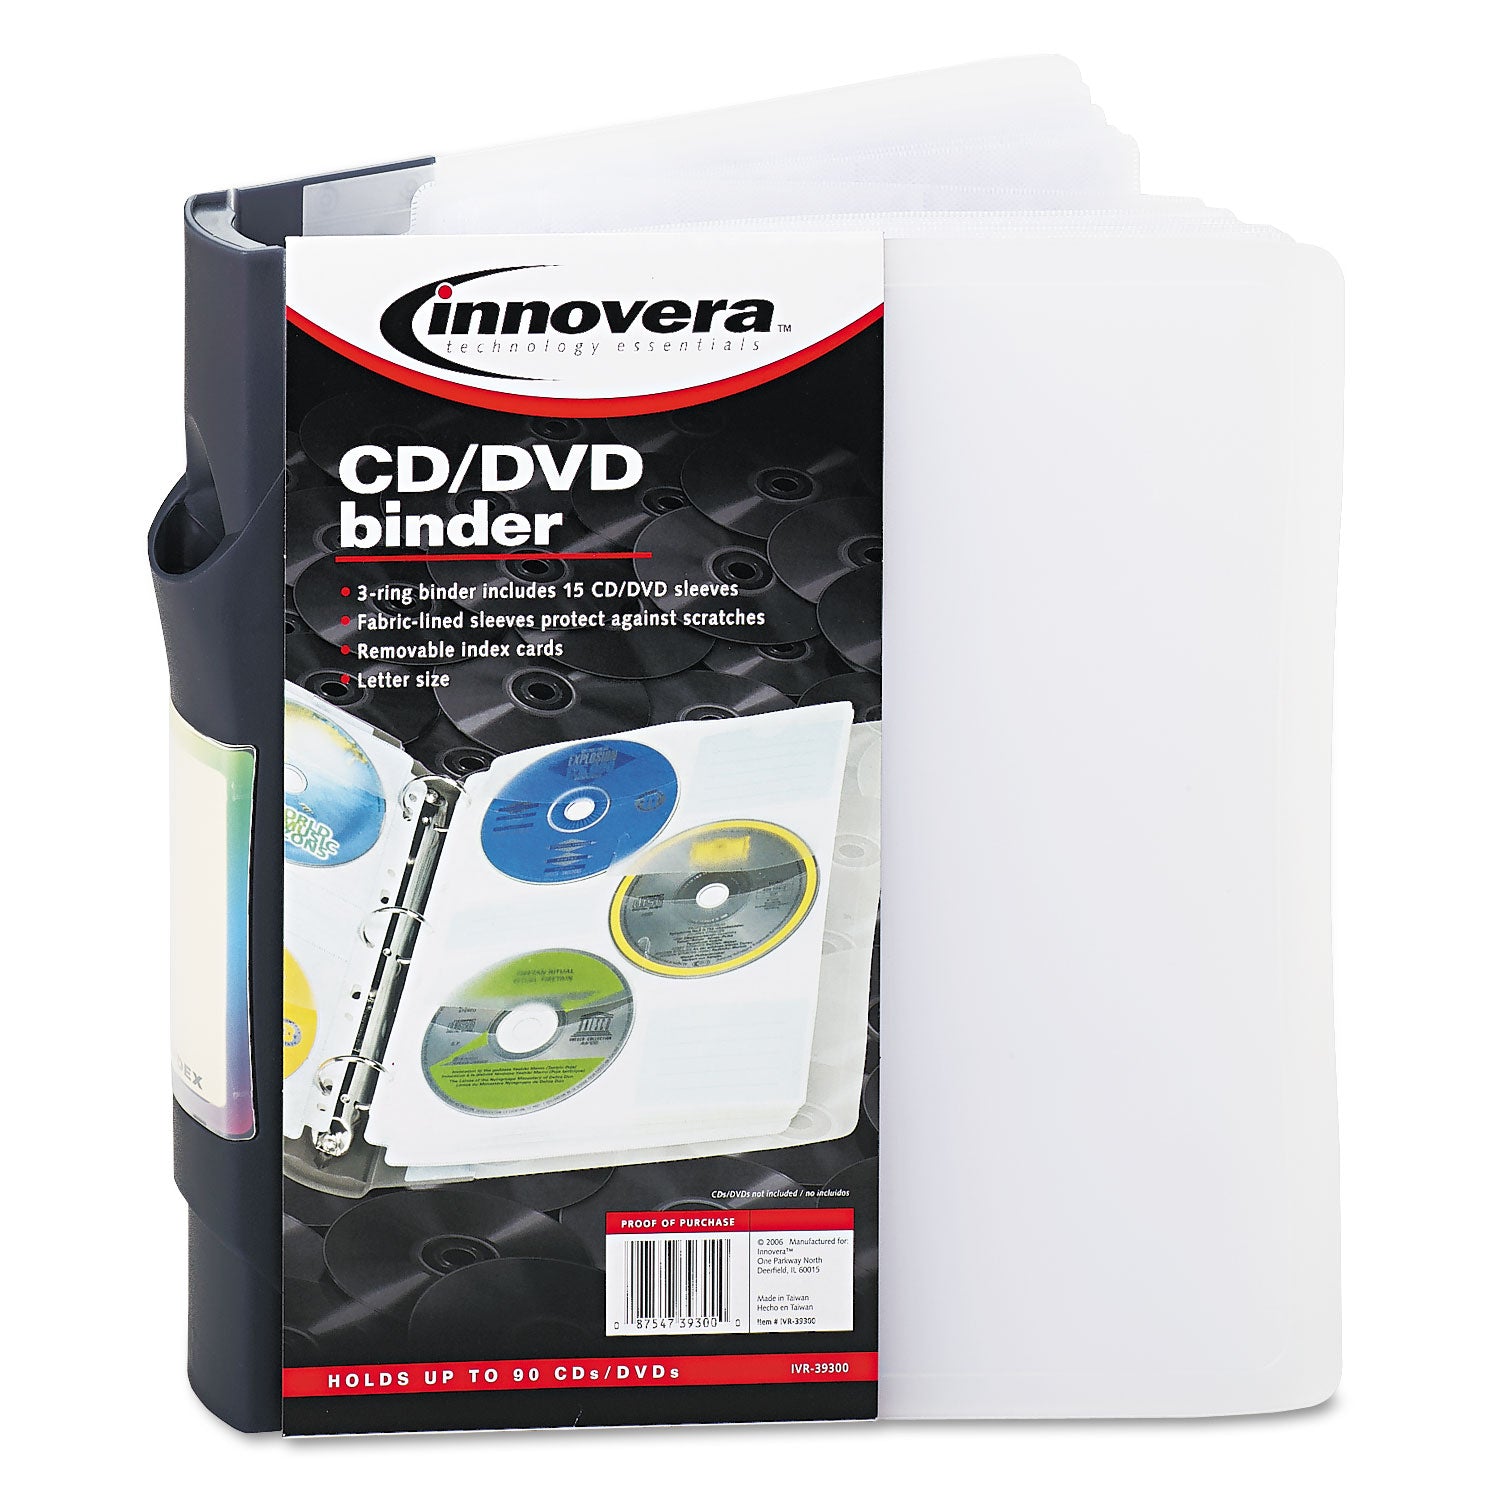 CD/DVD Three-Ring Refillable Binder, Holds 90 Discs, Midnight Blue/Clear - 